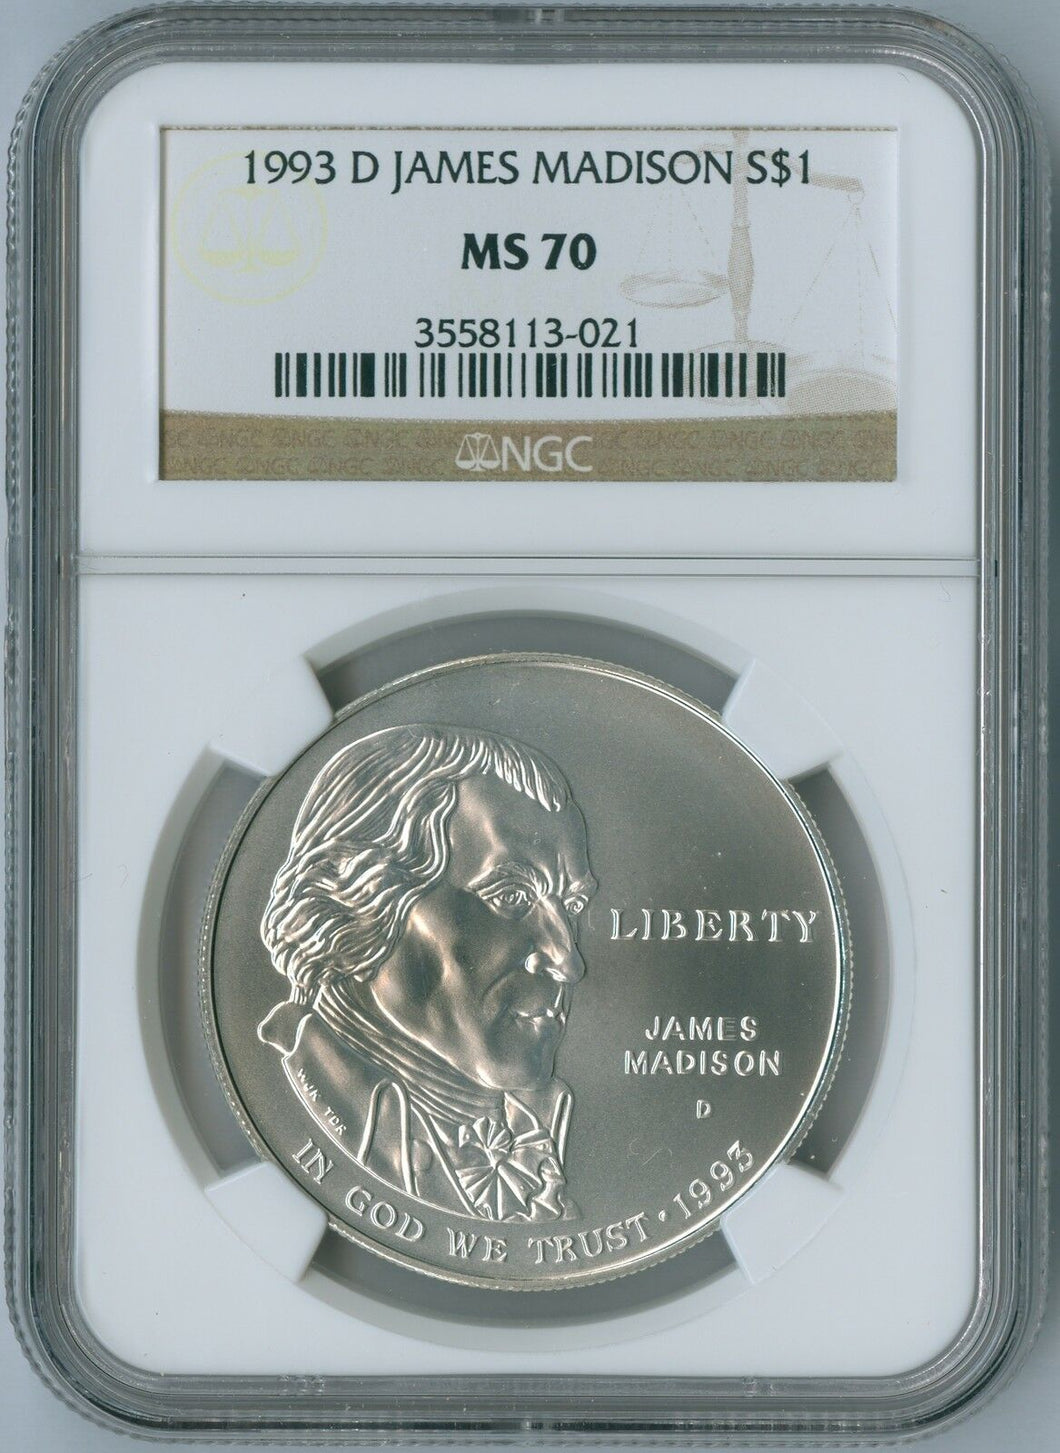 1993 D James Madison Bill of Right Commemorative Coin $1 NGC MS 70 MS70 Perfect